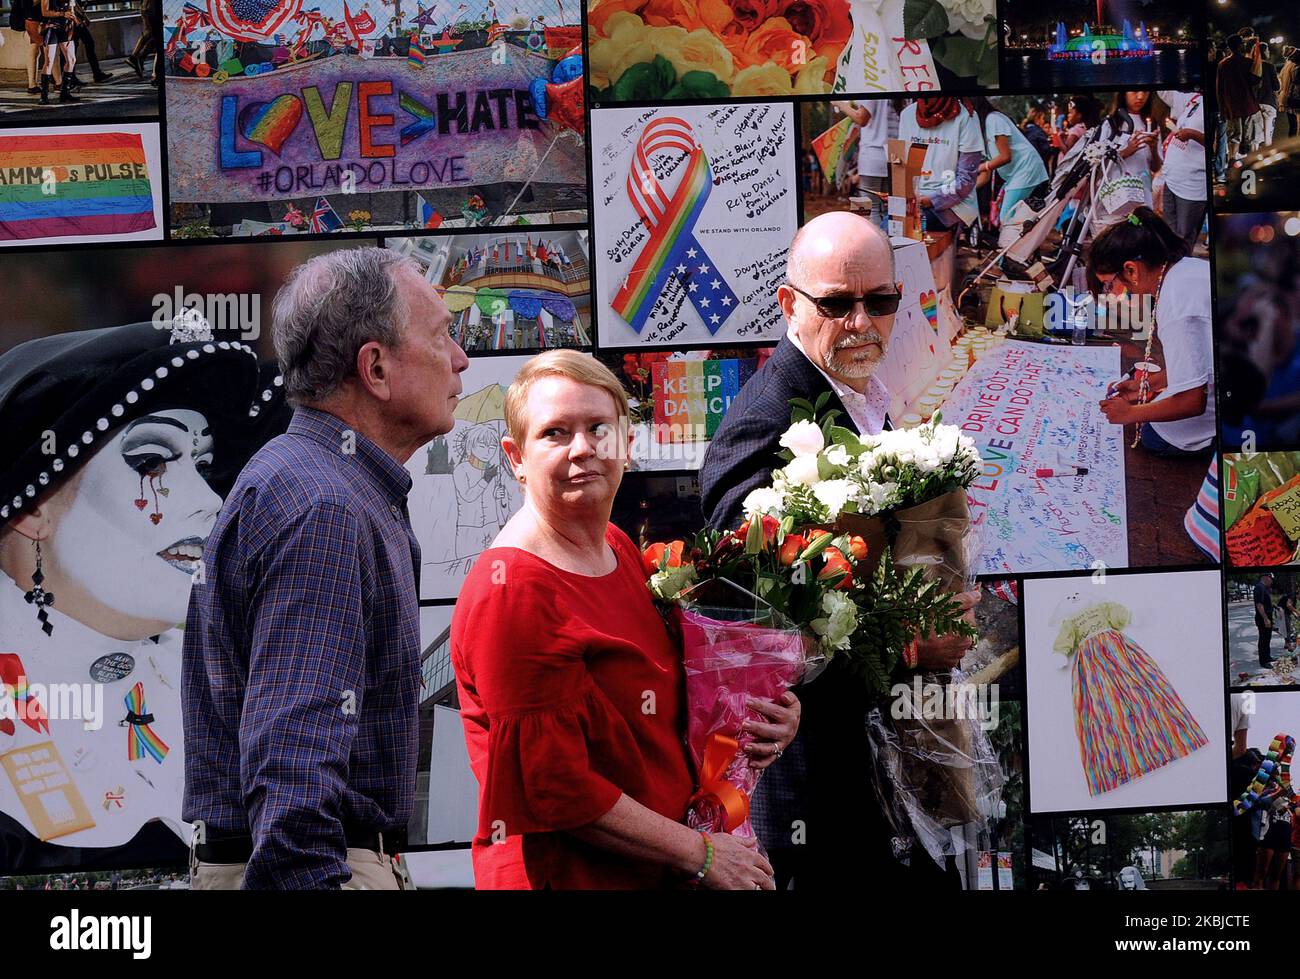 March 3, 2020 - Orlando, Florida, United States -Democratic presidential candidate former New York mayor Mike Bloomberg (left) visits the Pulse memorial with Fred and Maria Wright, whose son, Jerry Wright, was killed during the Pulse shooting, following a campaign stop in Orlando, Florida on Super Tuesday, on March 3, 2020. (Photo by Paul Hennessy/NurPhoto) Stock Photo